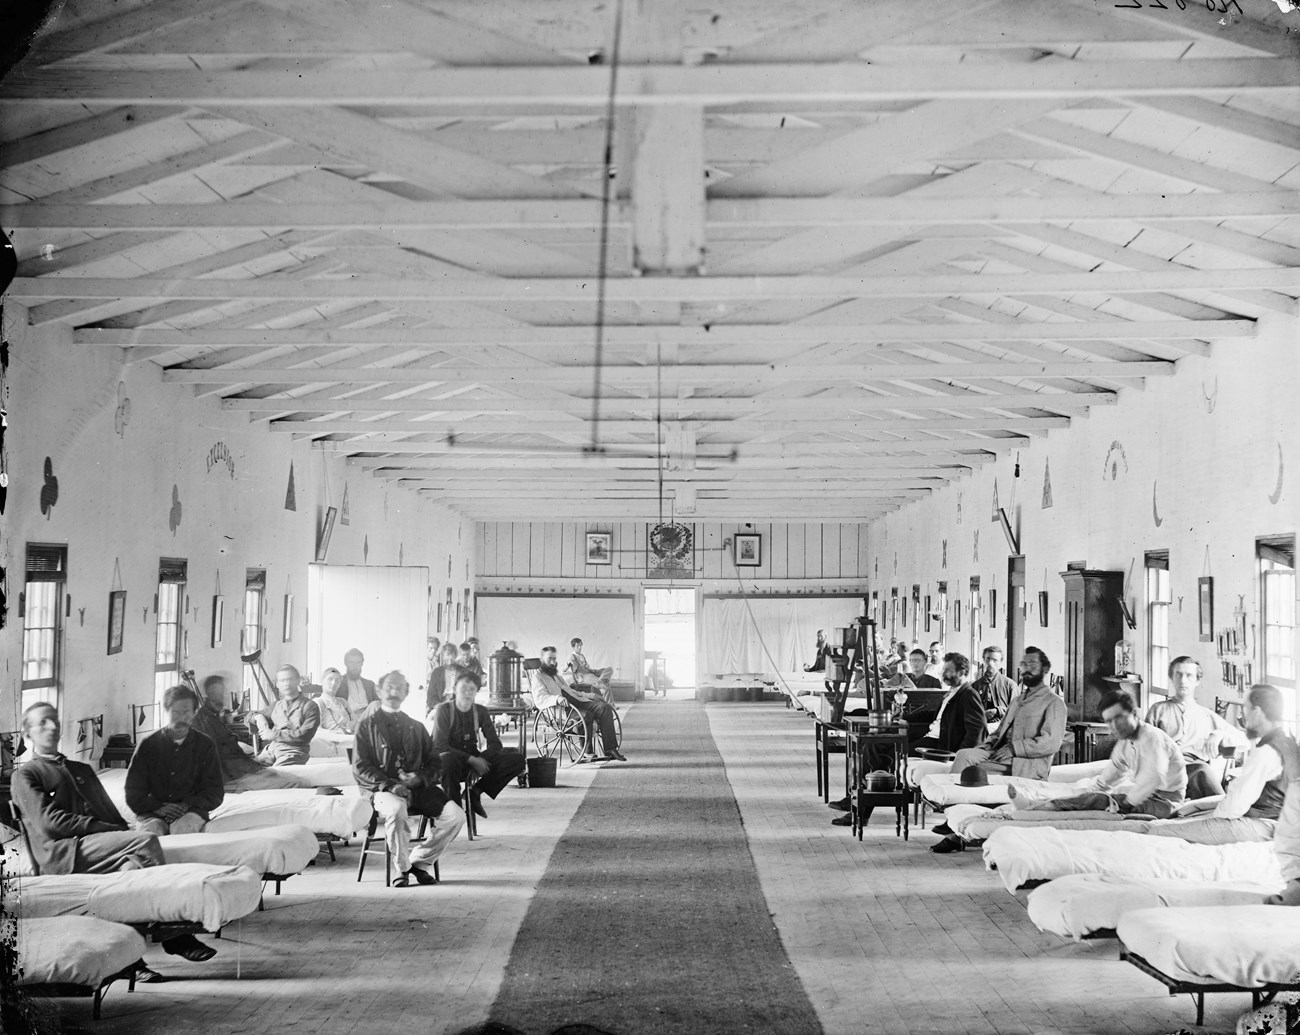 A long, open hospital wing with two lines of beds and soldiers sitting up, looking at the camera.